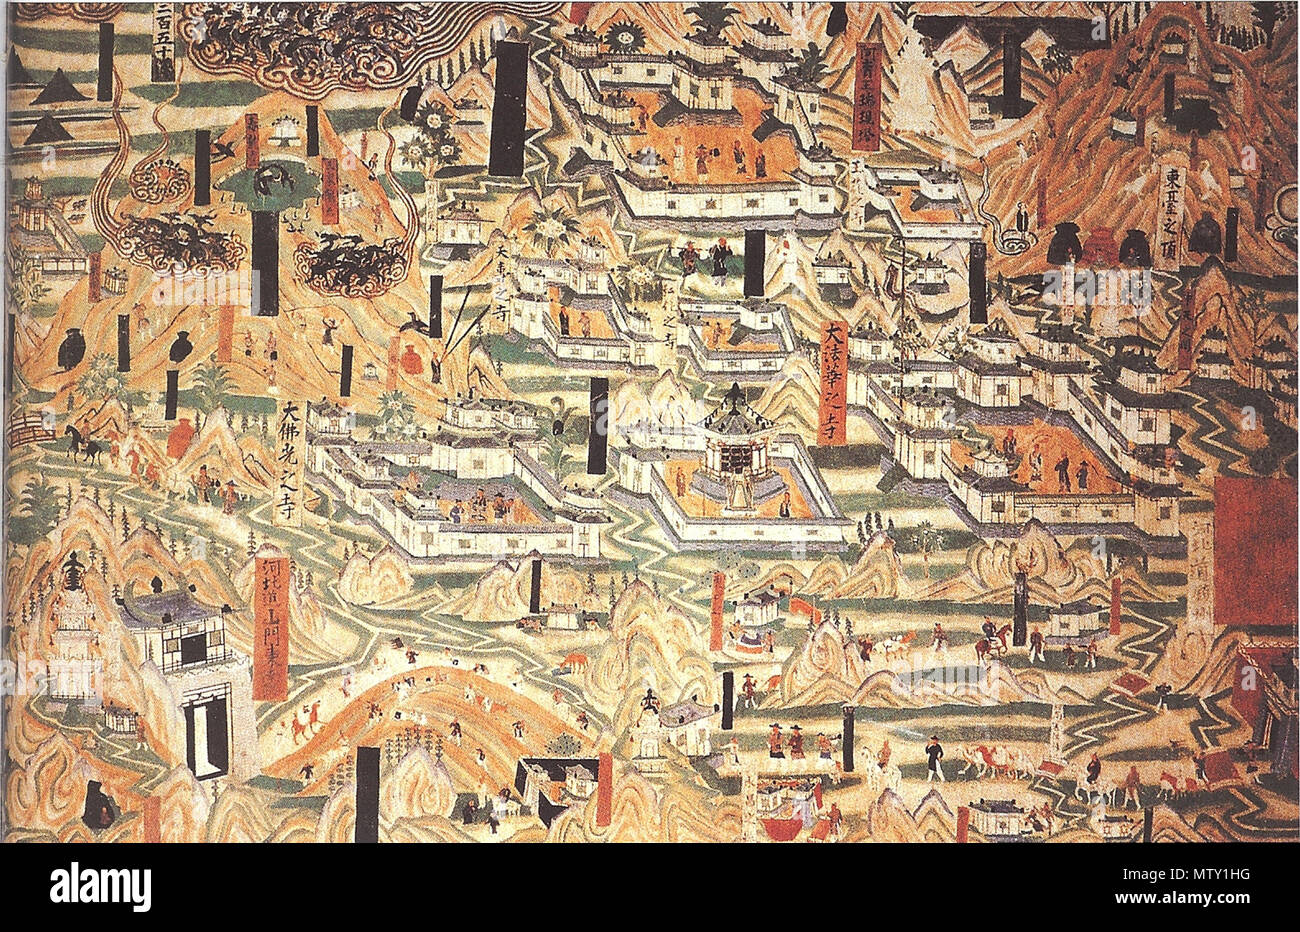 . A mural painting from Cave 61 at the Mogao Caves, Dunhuang, Gansu province, China, dated to the 10th century and depicting Tang Dynasty monastic architecture from Mount Wutai, Shanxi province. 10th century. Chinese artist(s) from the 10th century 421 Mogao Cave 61, painting of Mount Wutai monasteries Stock Photo